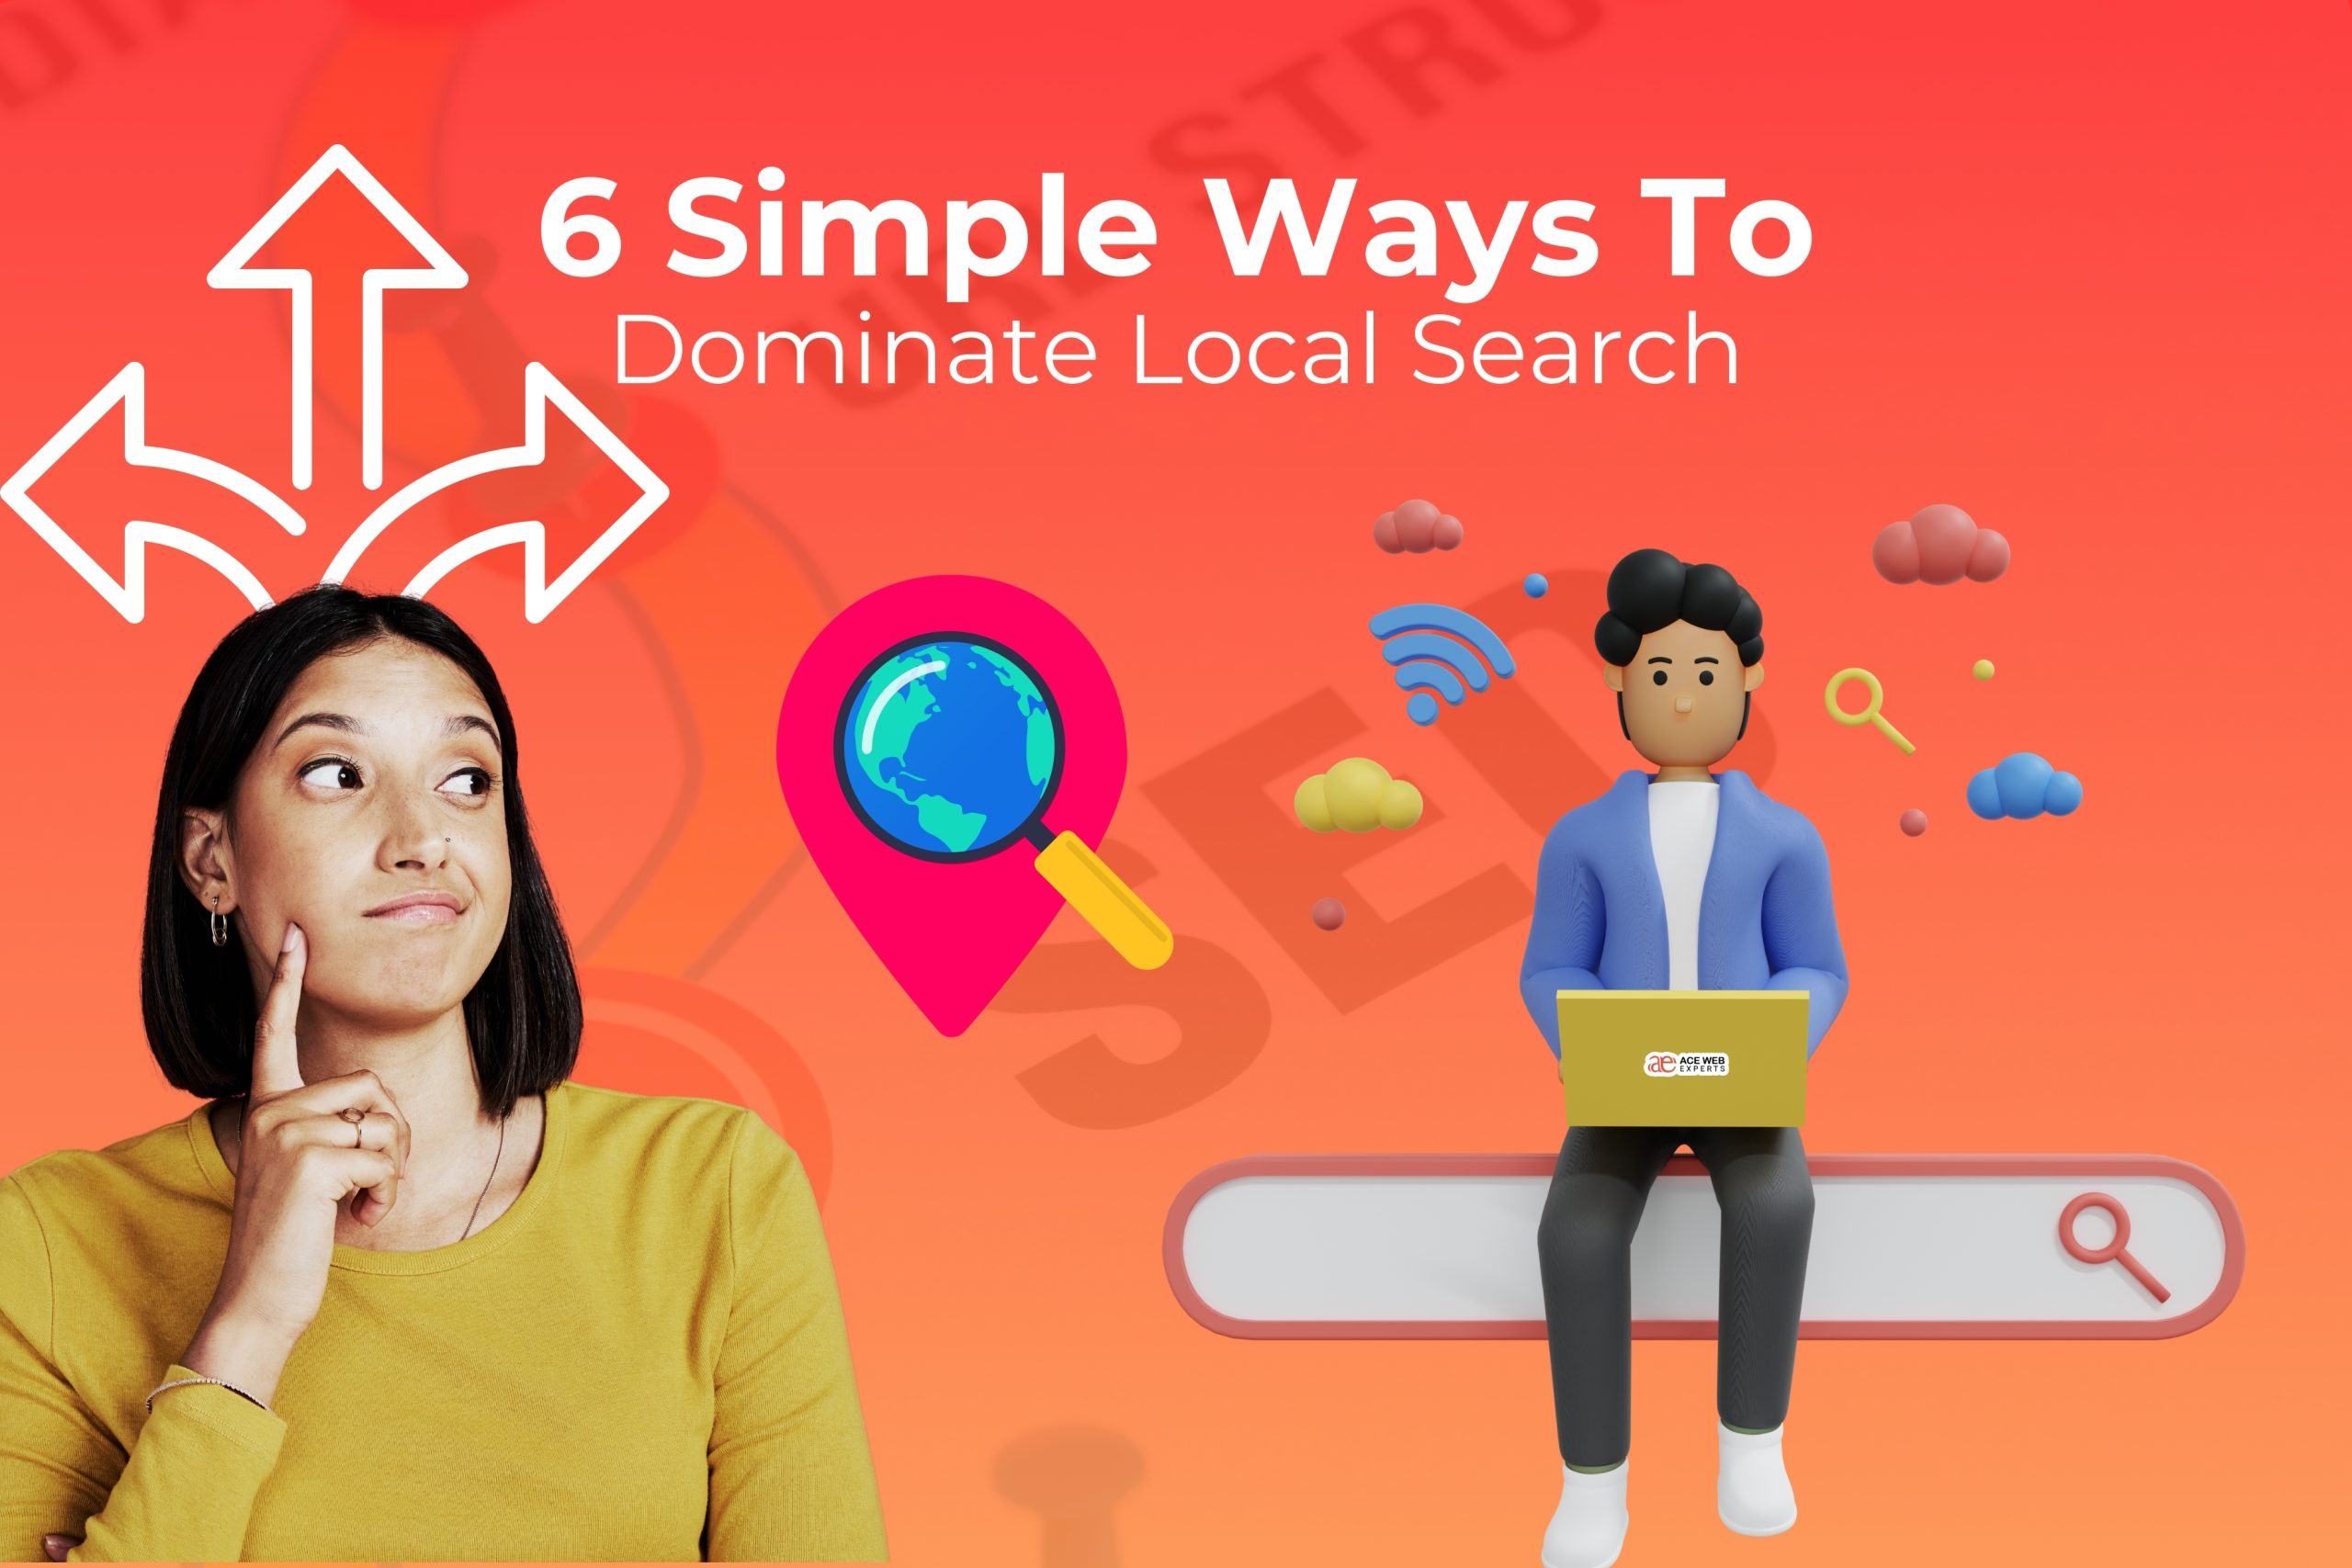 6 simple ways to dominate local search